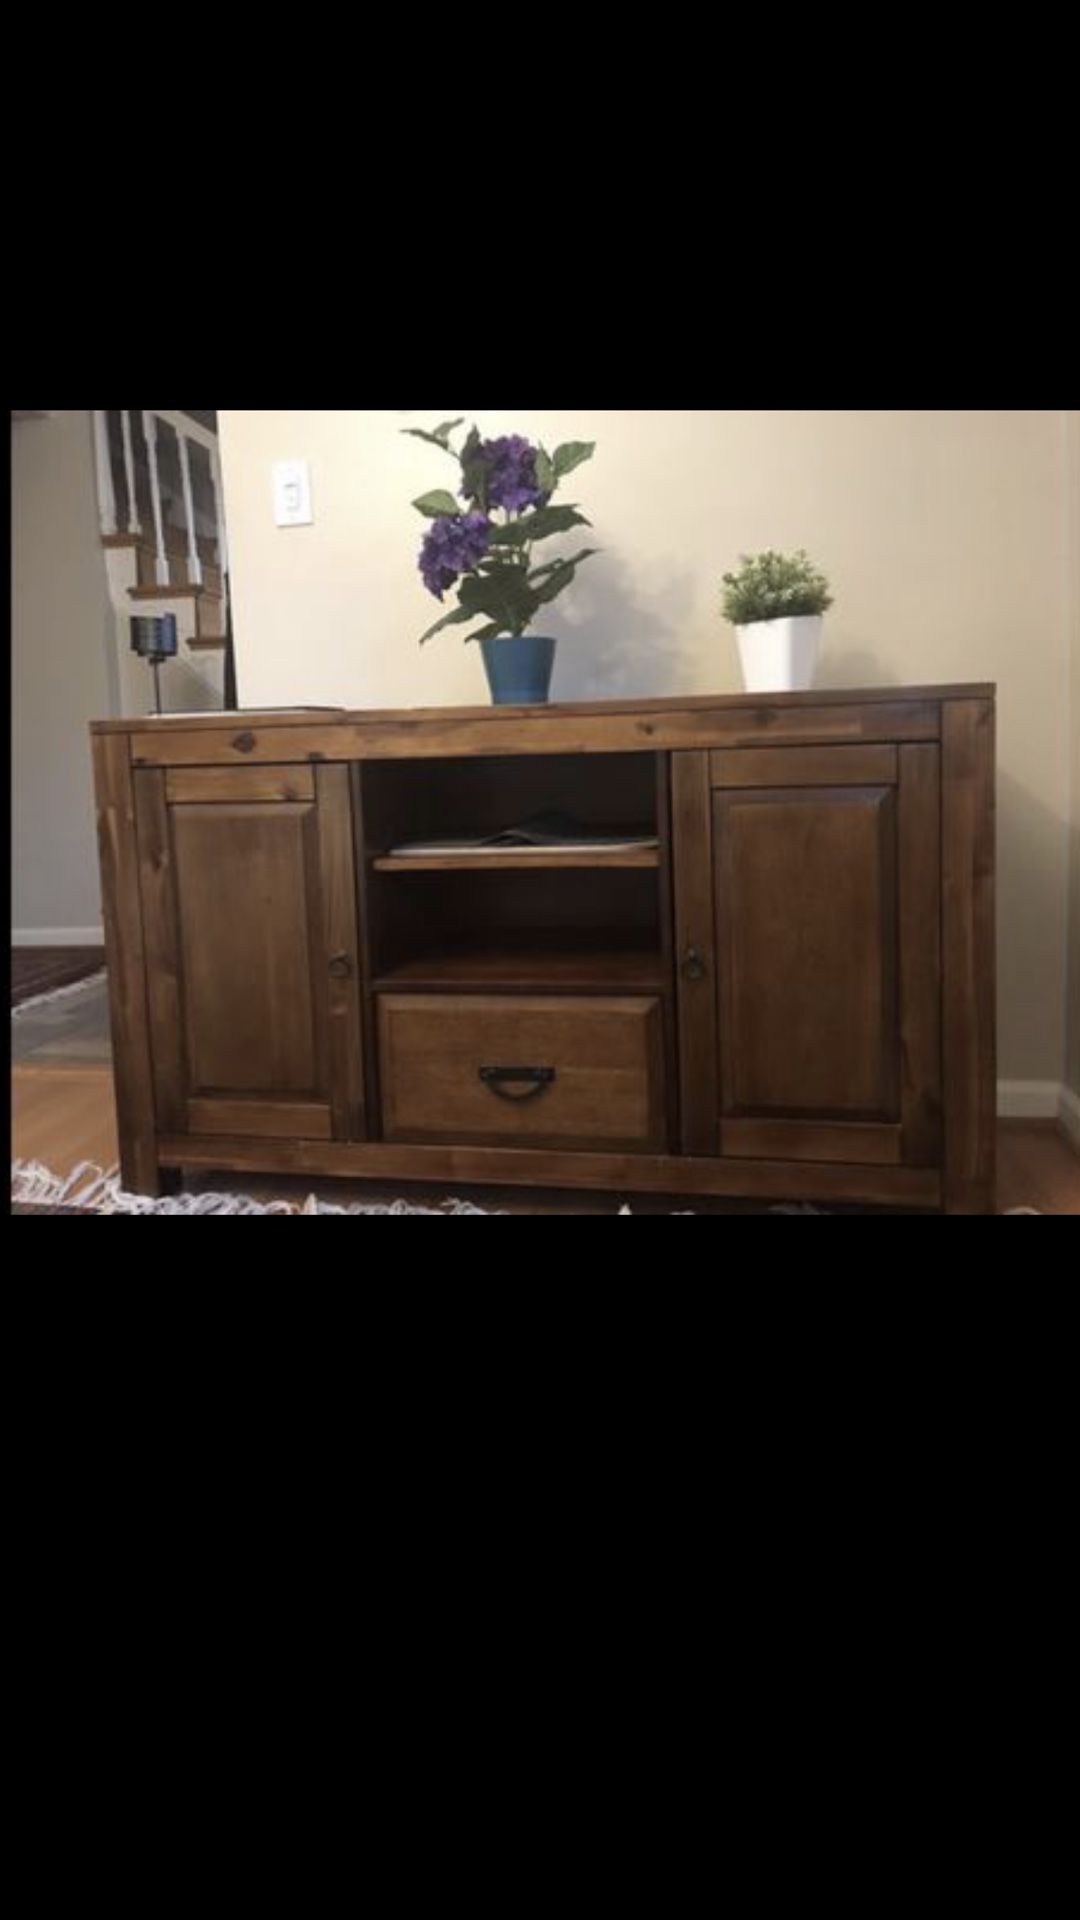 China cabinet and TV stand